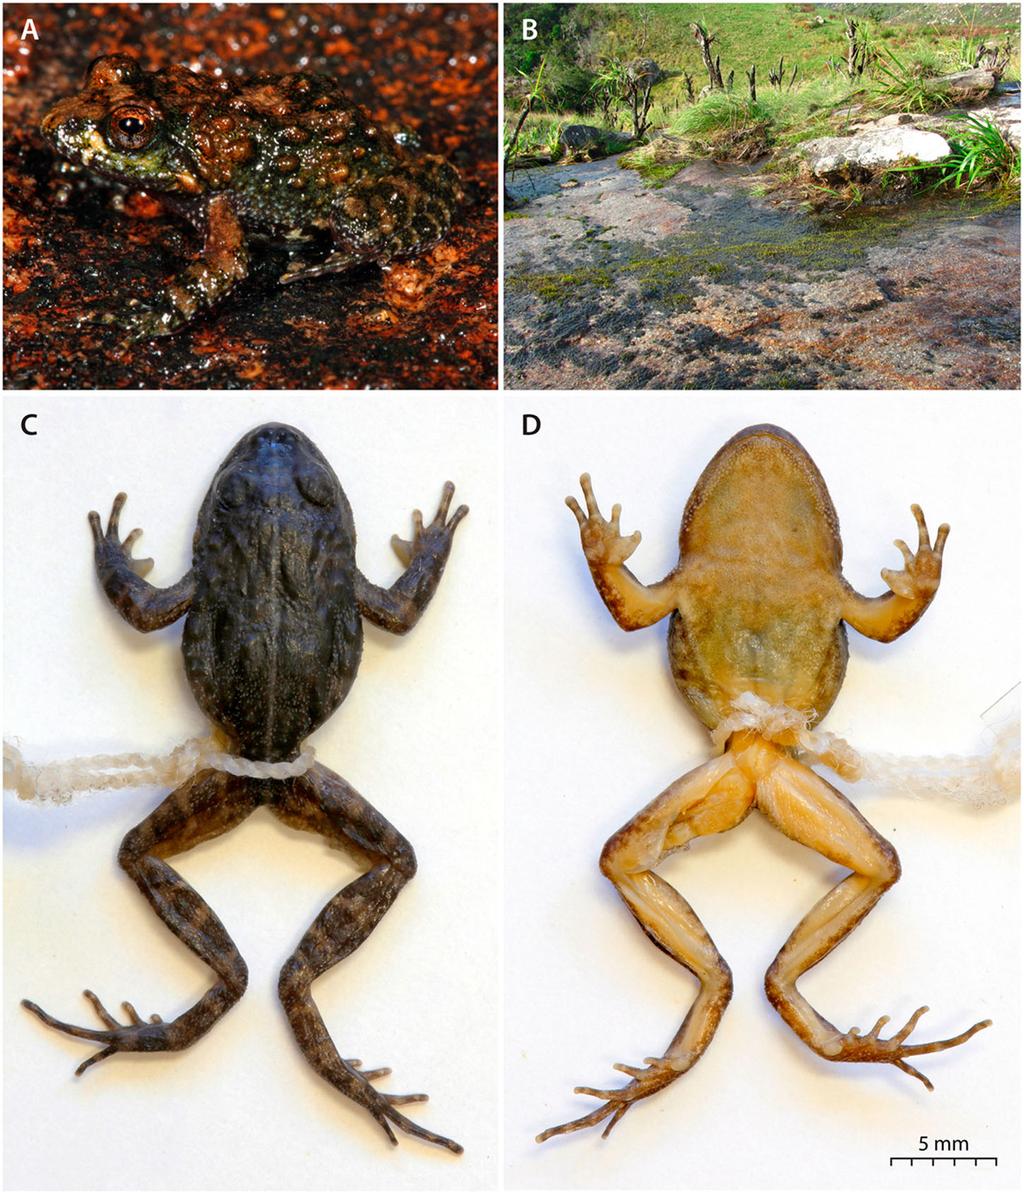 AFRICAN JOURNAL OF HERPETOLOGY 7 Figure 3. Nothophryne broadleyi from Mount Mulanje. (A) Adult male, (B) habitat, (C) dorsal view of male PEM A10714, (D) ventral view of male PEM A10714.